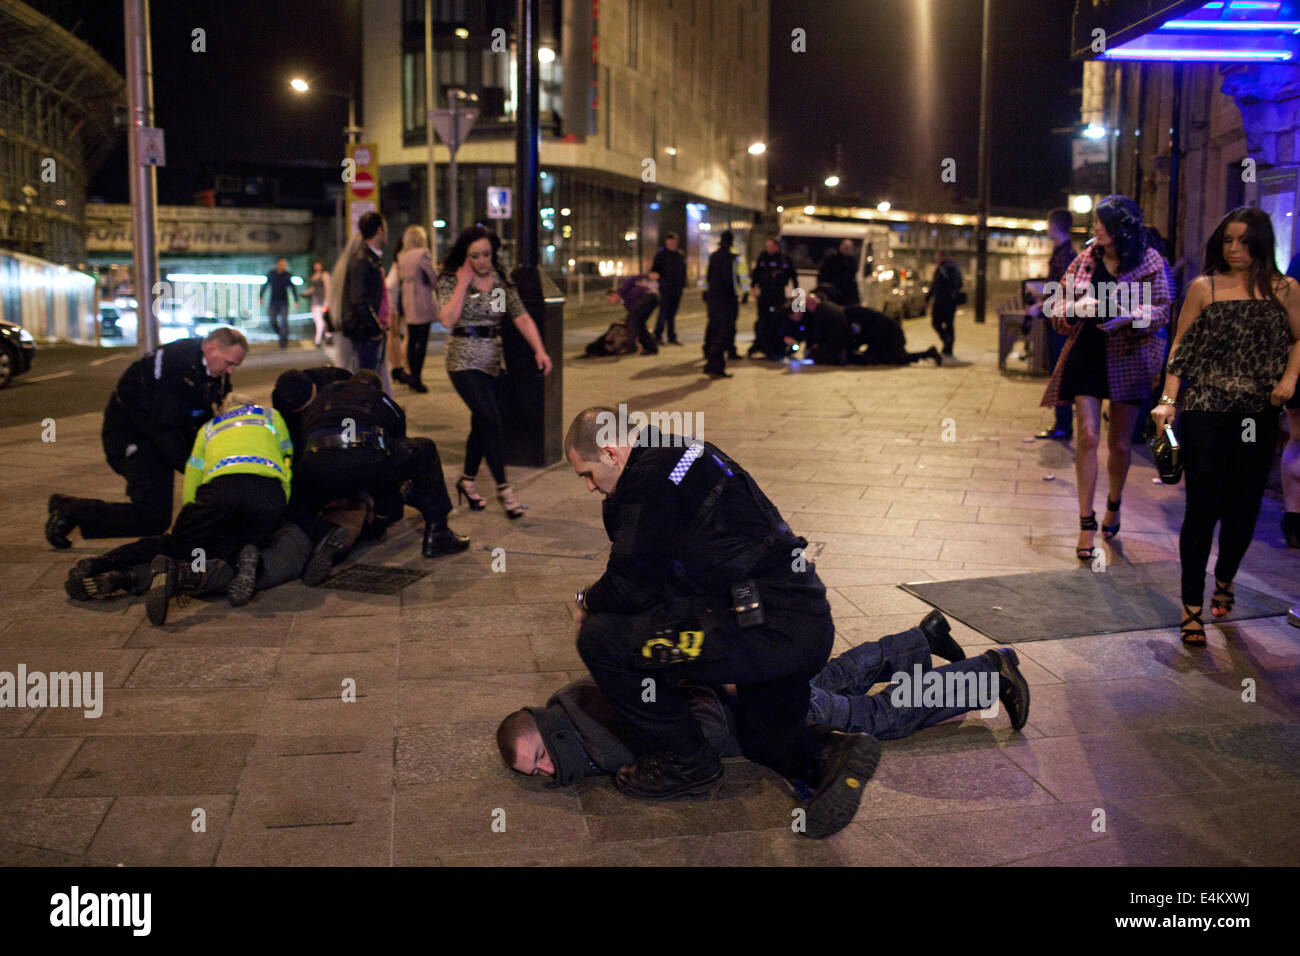 Police arresting people and breaking a fight on a weekend night in the city centre of Cardiff, Wales, UK Stock Photo